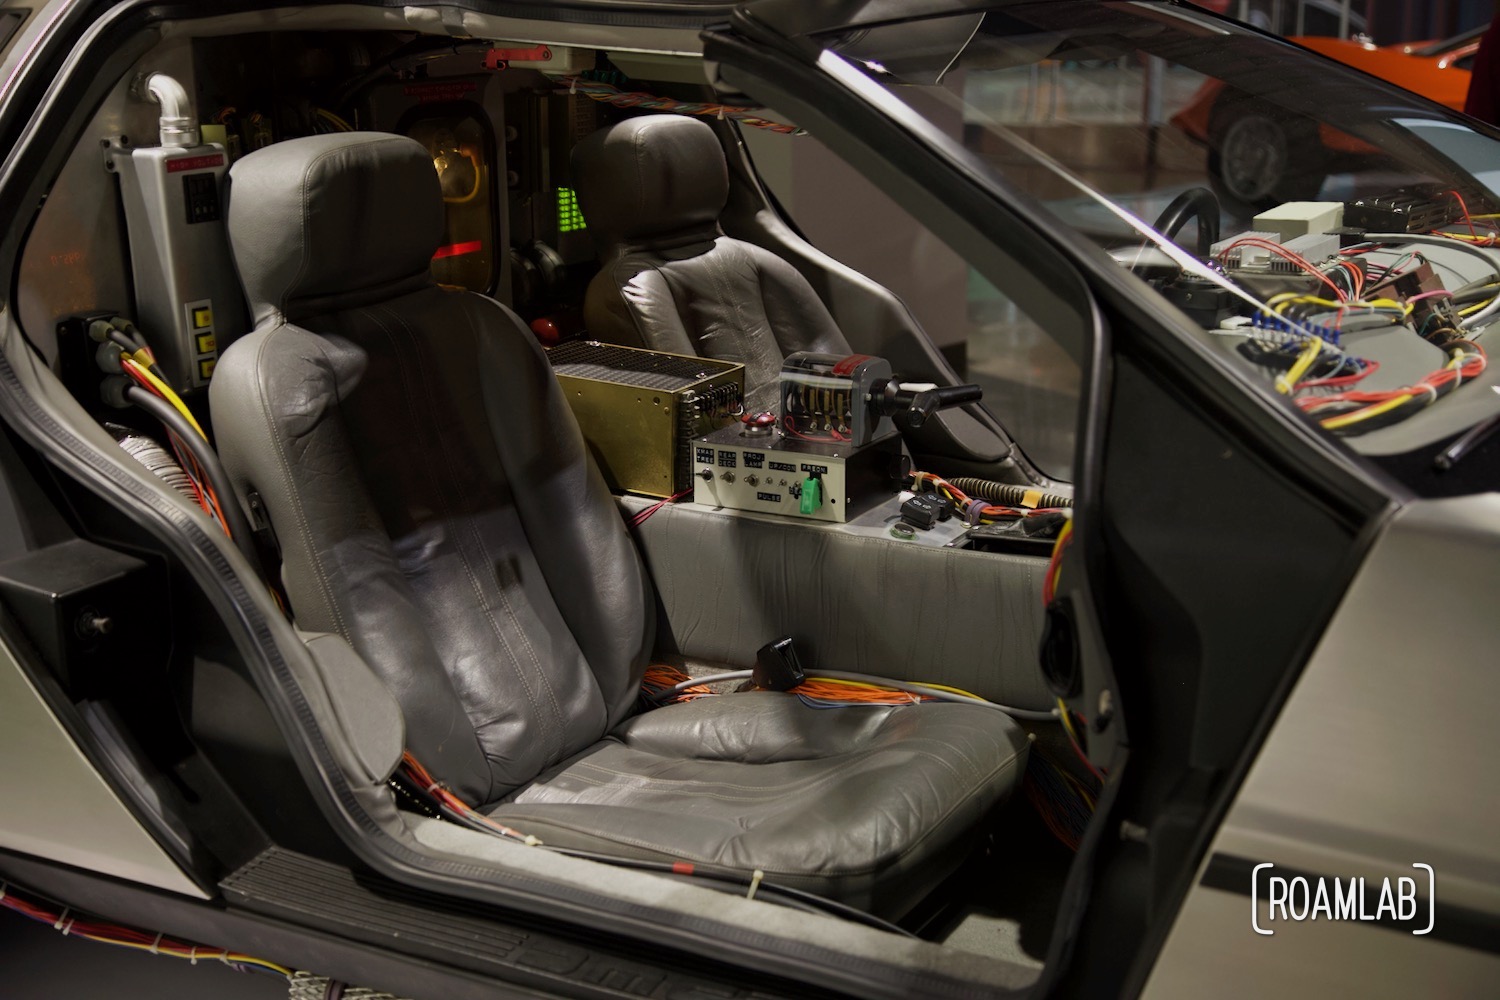 Interior view of the 1981 DeLorean "Time Machine" from Back to the Future.